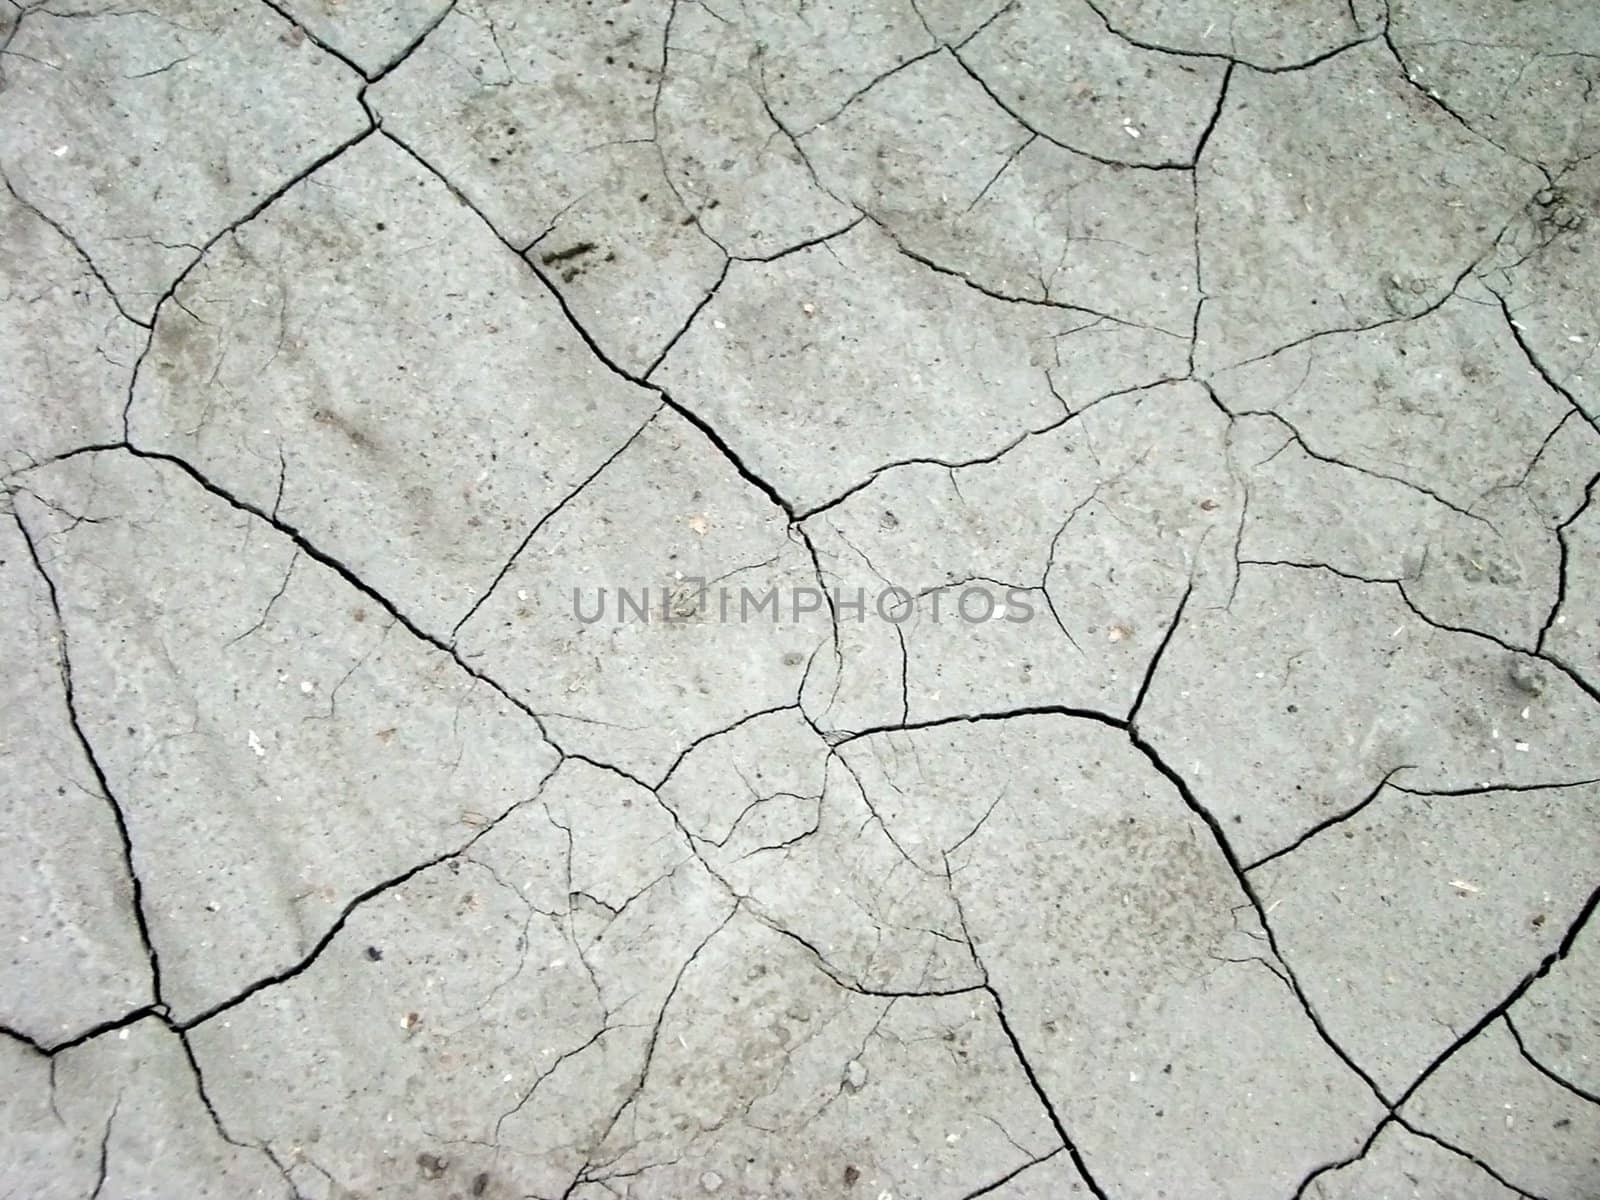 Dry ground, land, background, rifts, pattern, texture, abstraction, gray colour, relief, drought, dehydration